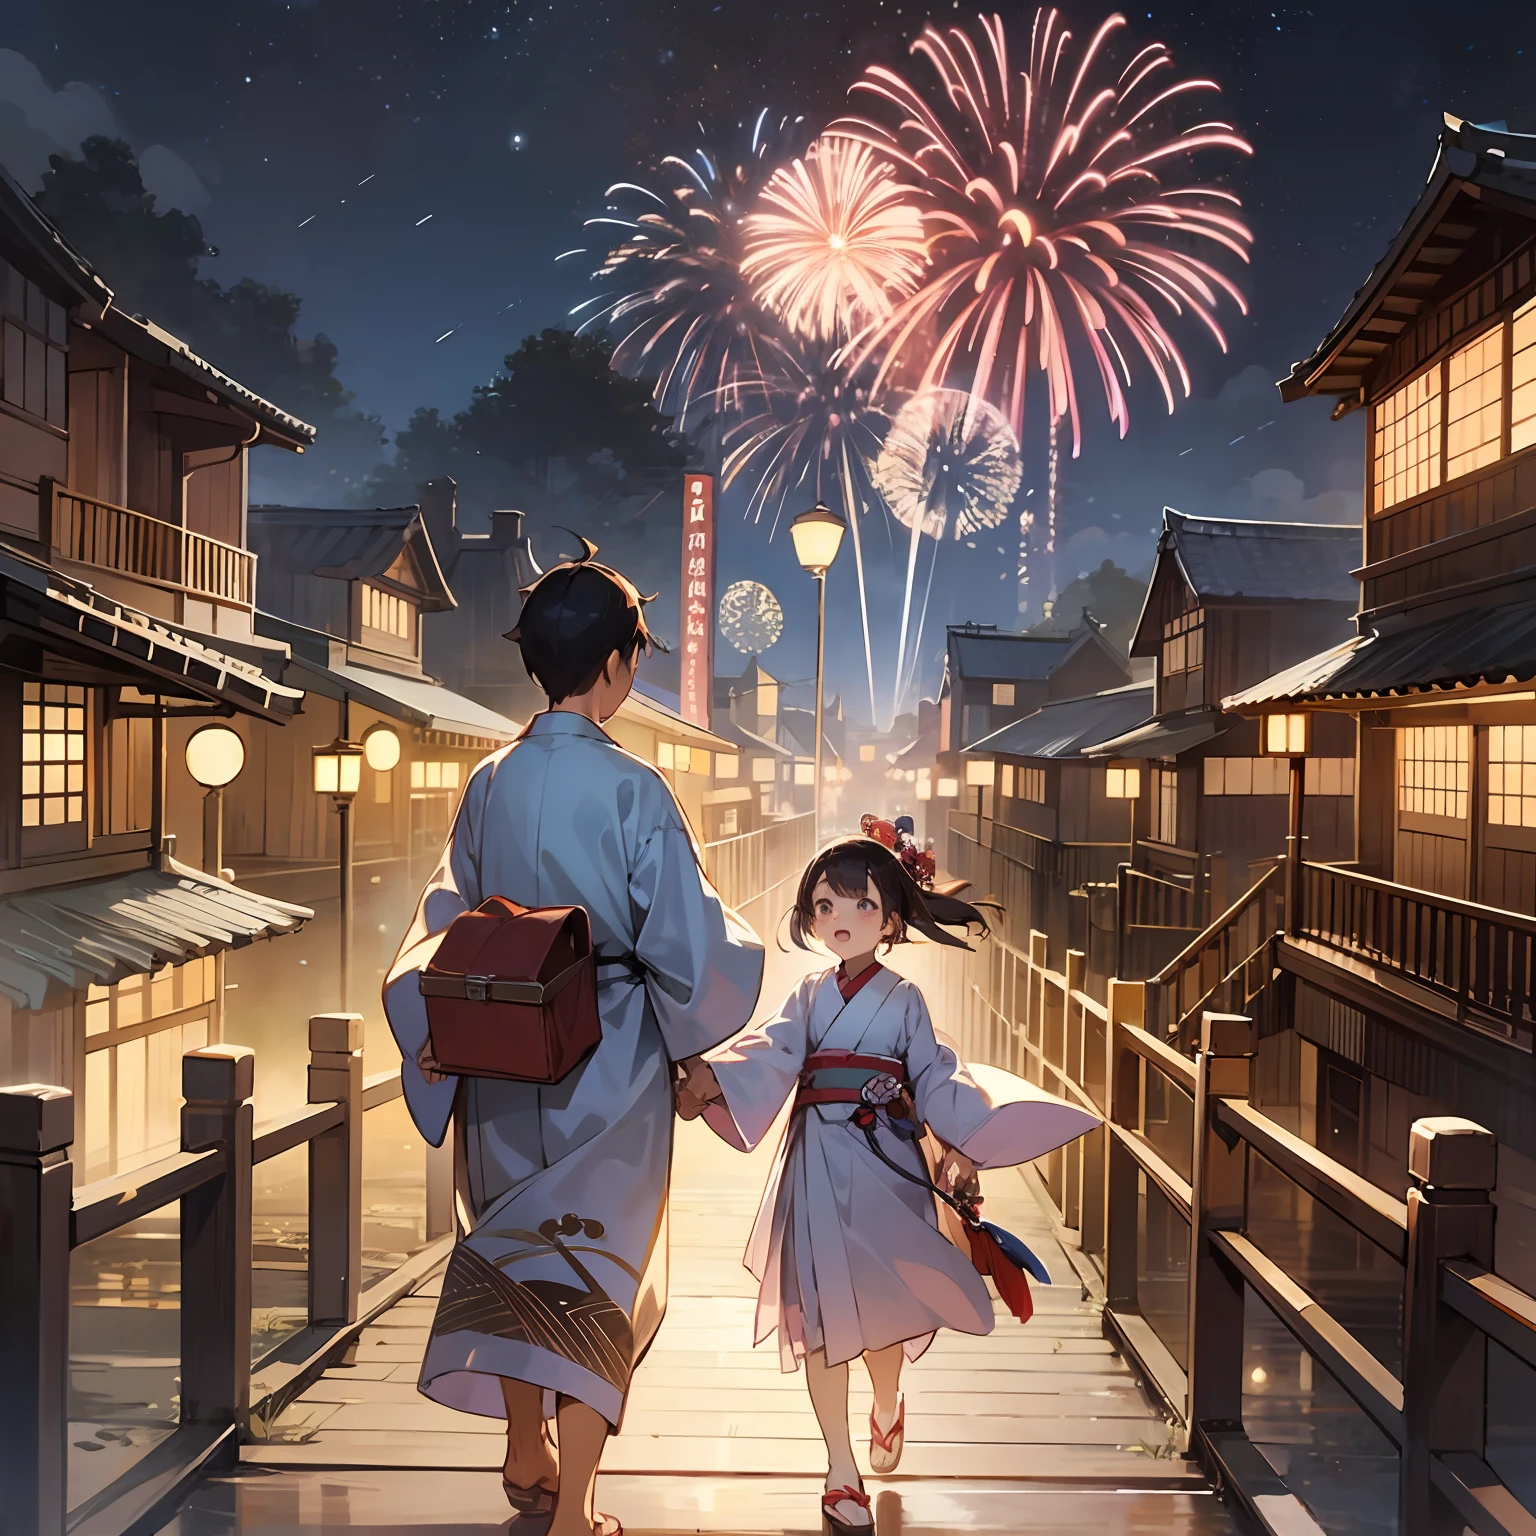 Walking hand in hand with mother at fireworks display venue５There is a girl of year old, traditional japanese concept art, [ Fireworks in the sky ]!!